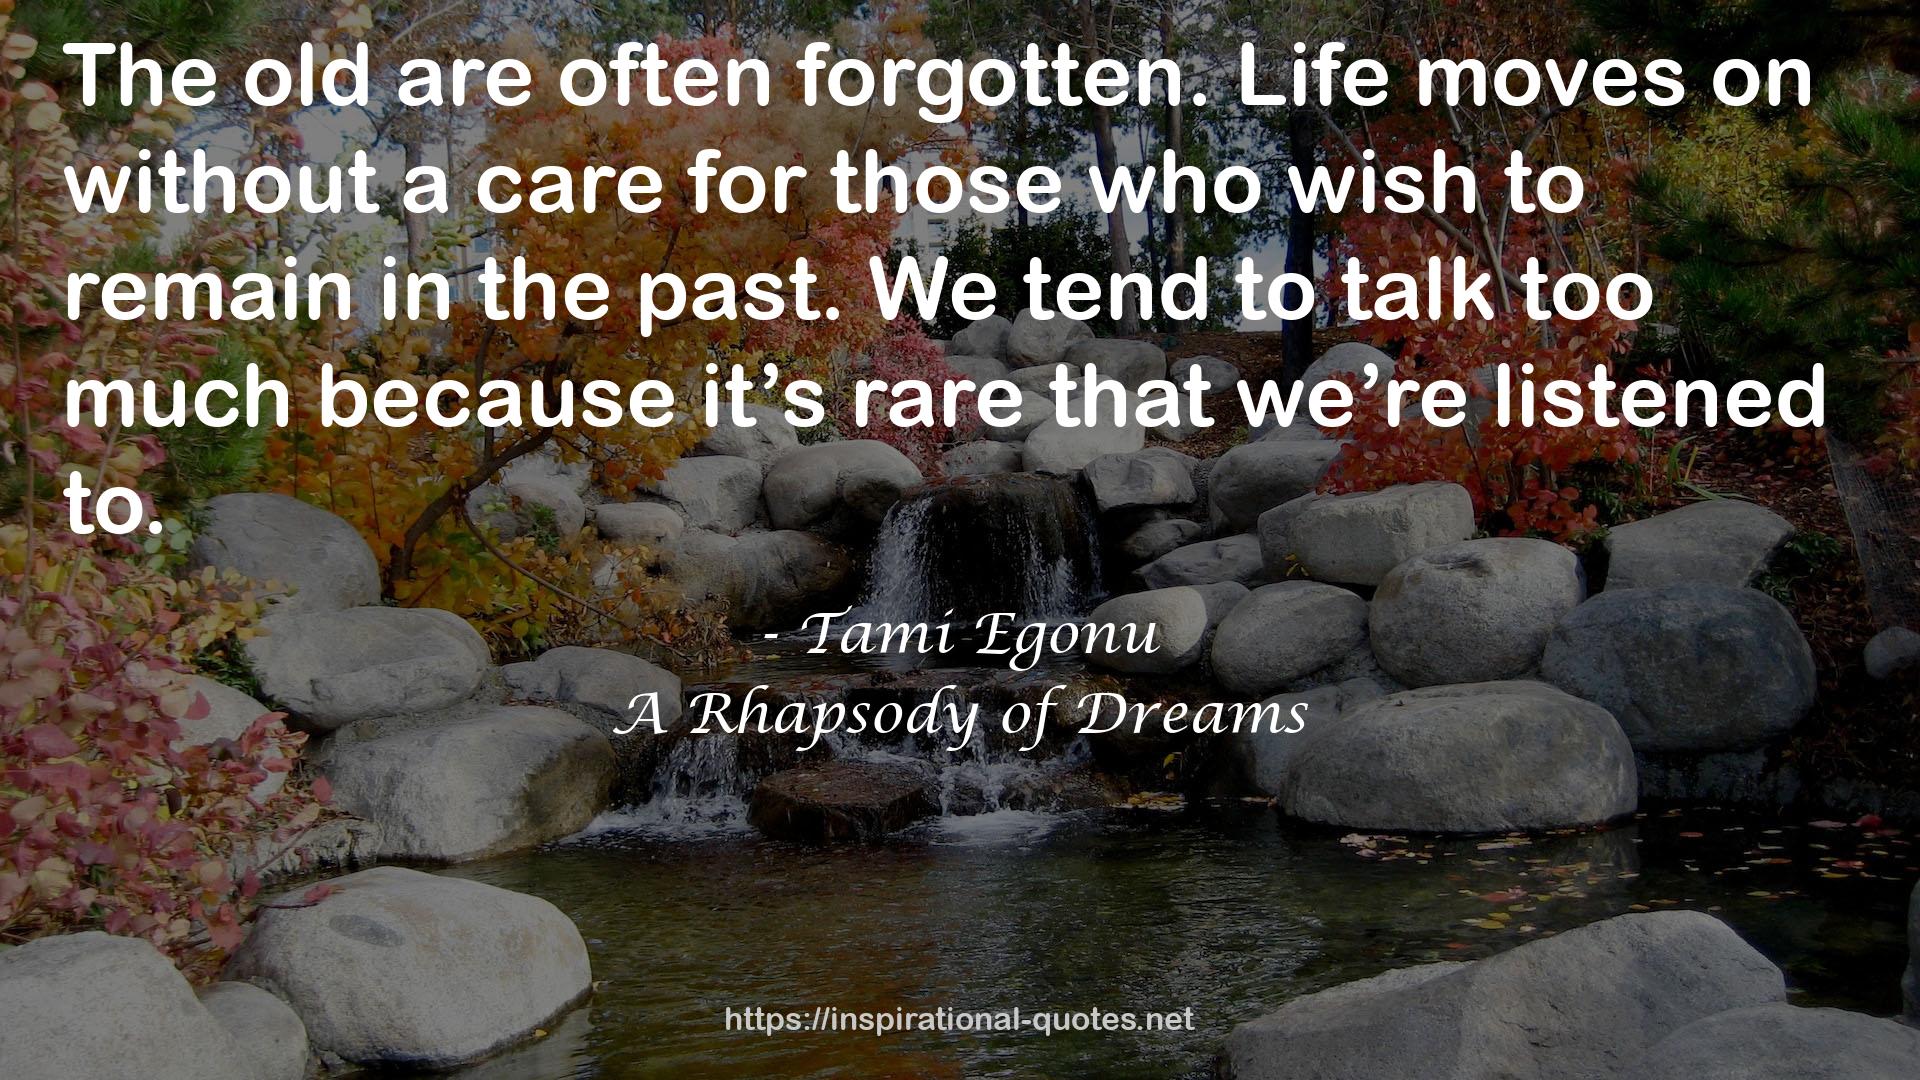 A Rhapsody of Dreams QUOTES